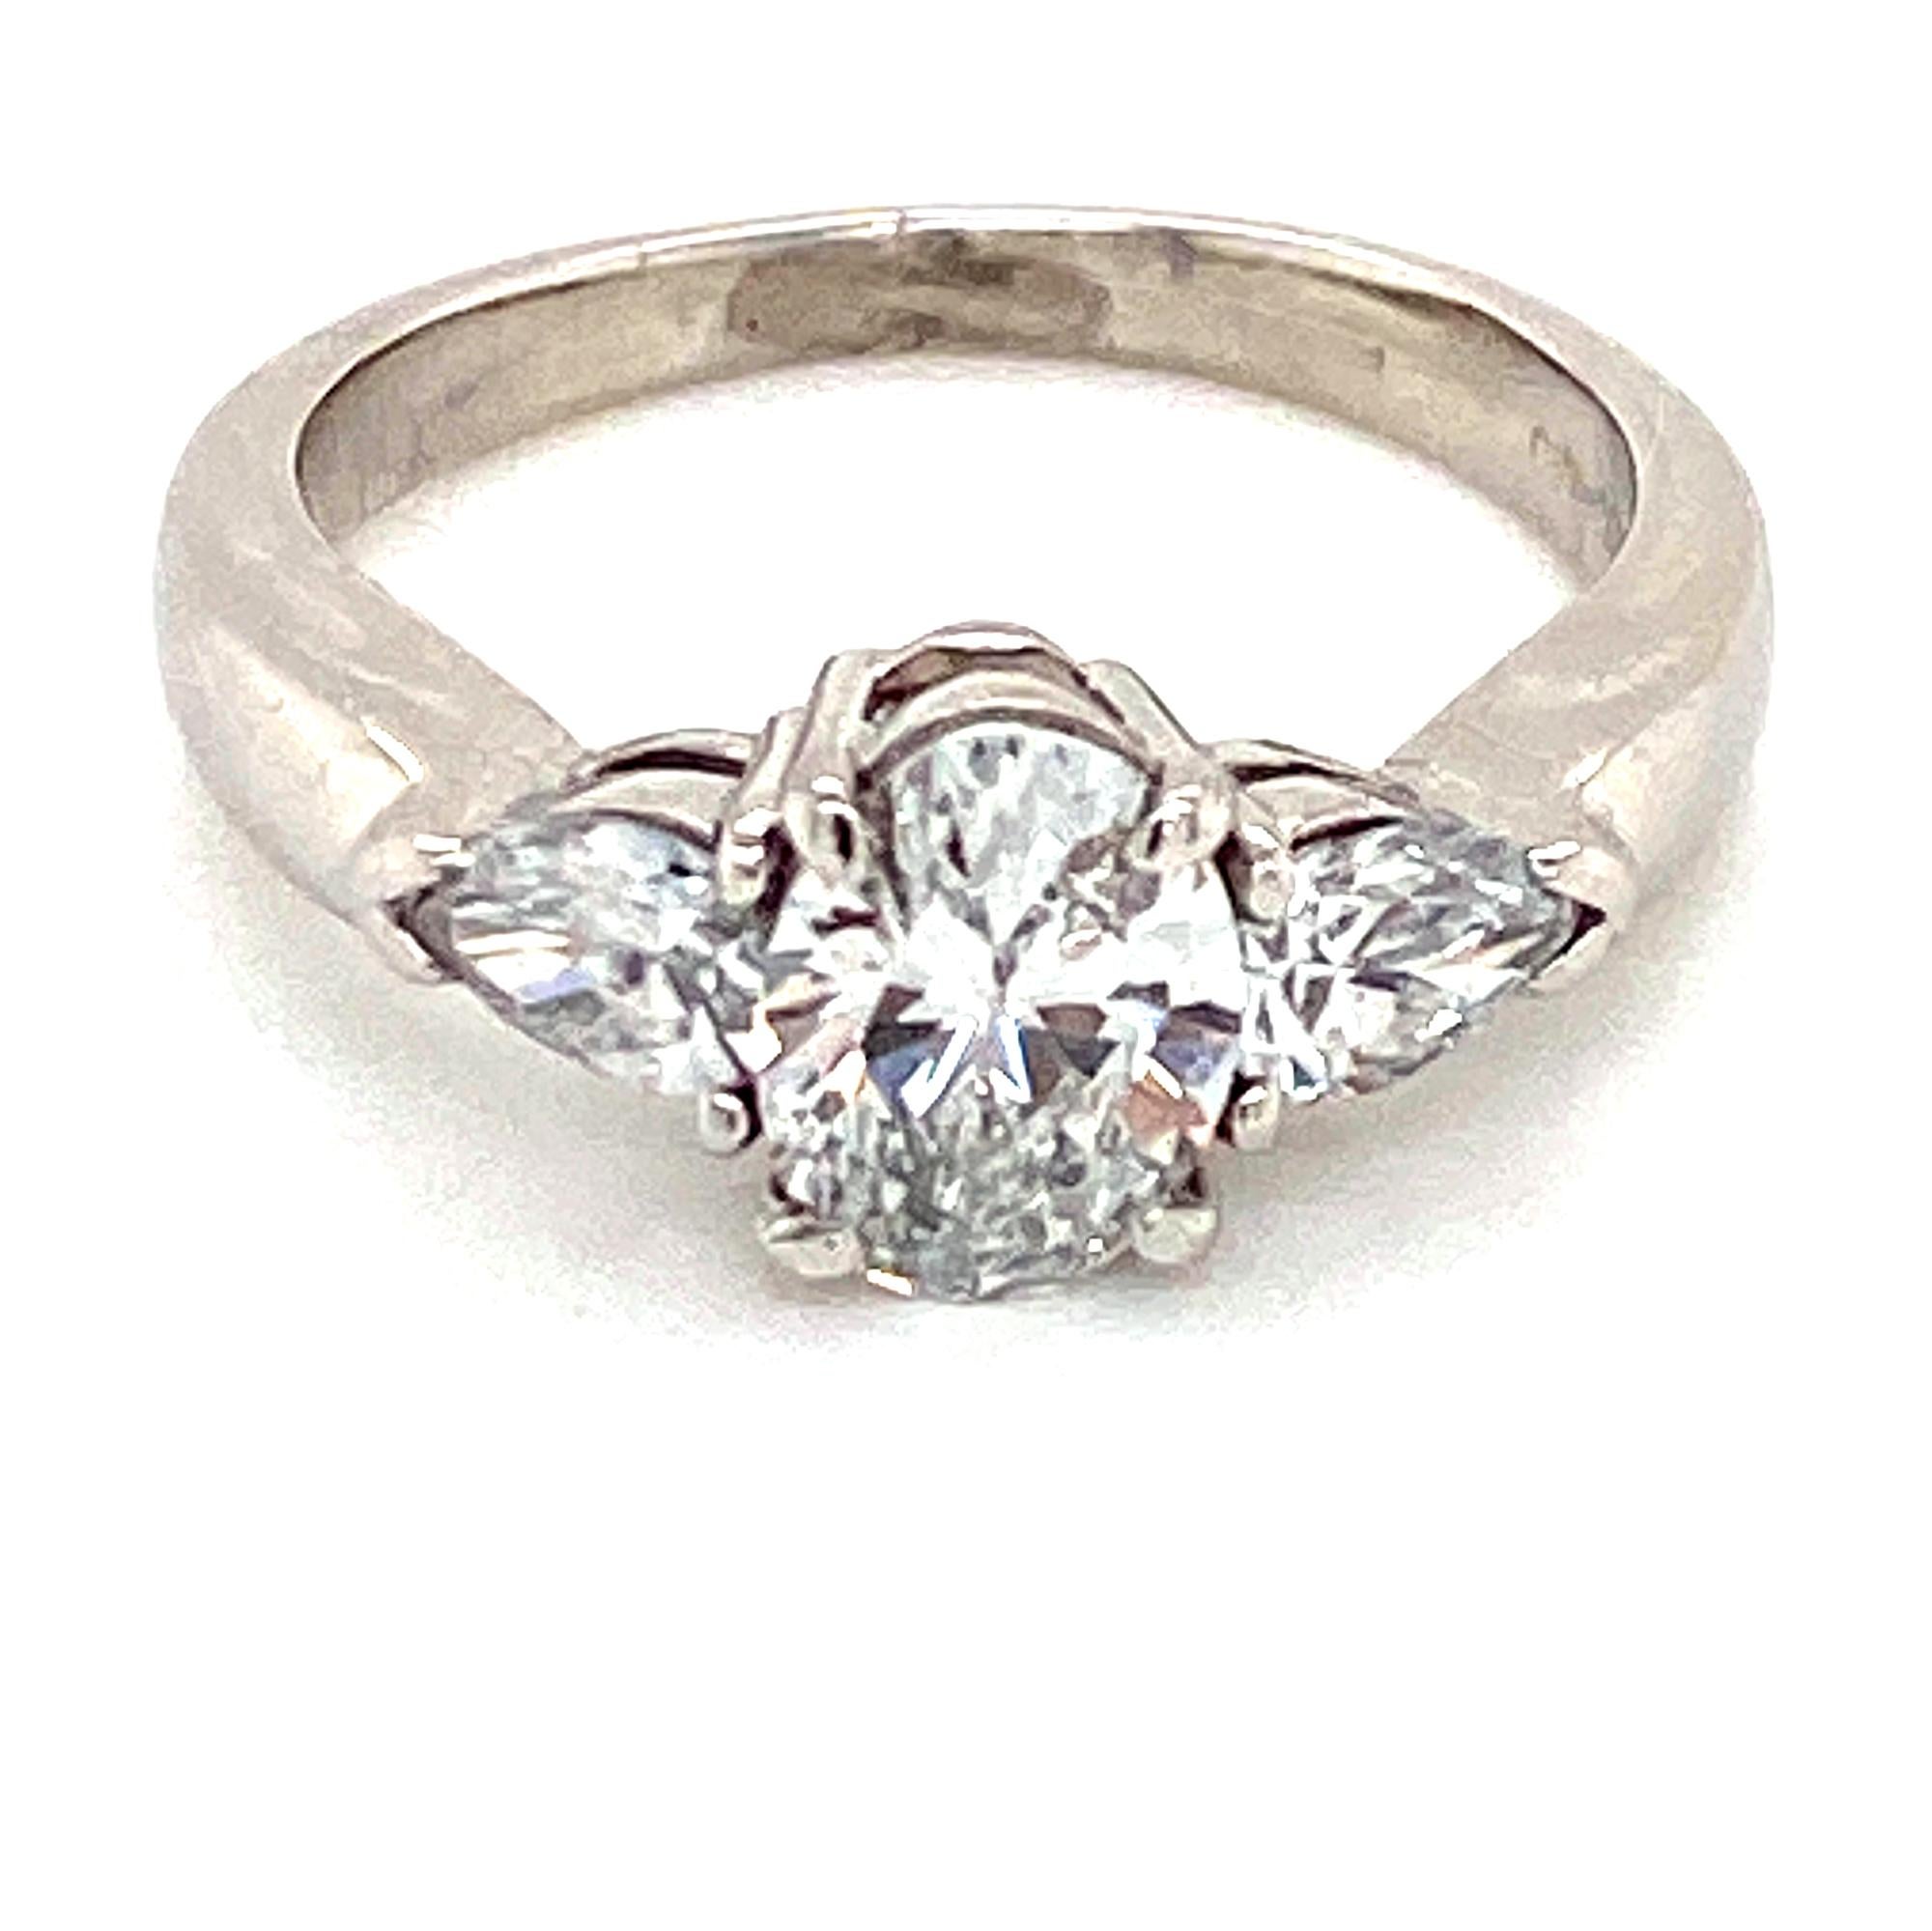 Diamond engagement ring fashioned in platinum. The oval cut diamond weighs .76 carats and is GIA certified F color and VS1 clarity. The oval is flanked by two pear shape diamonds weighing .40 carat total weight. The ring is currently size 5.5 (can